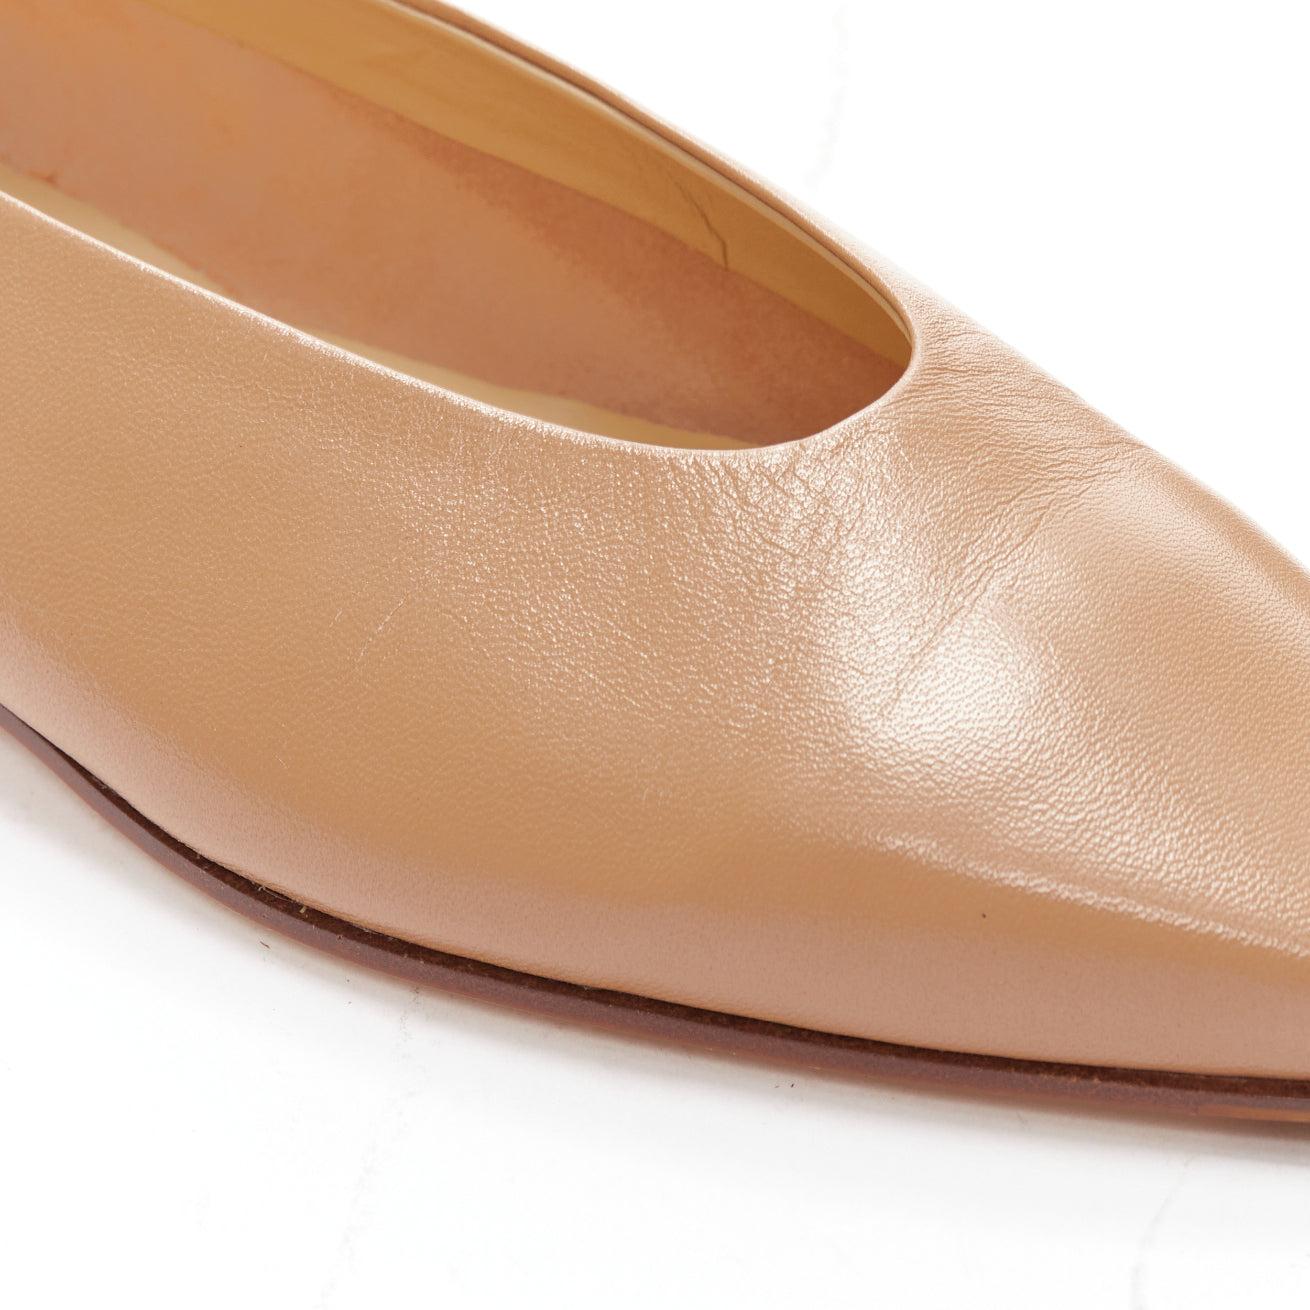 new AEYDE nude smooth leather square toe ballet flats EU37 3